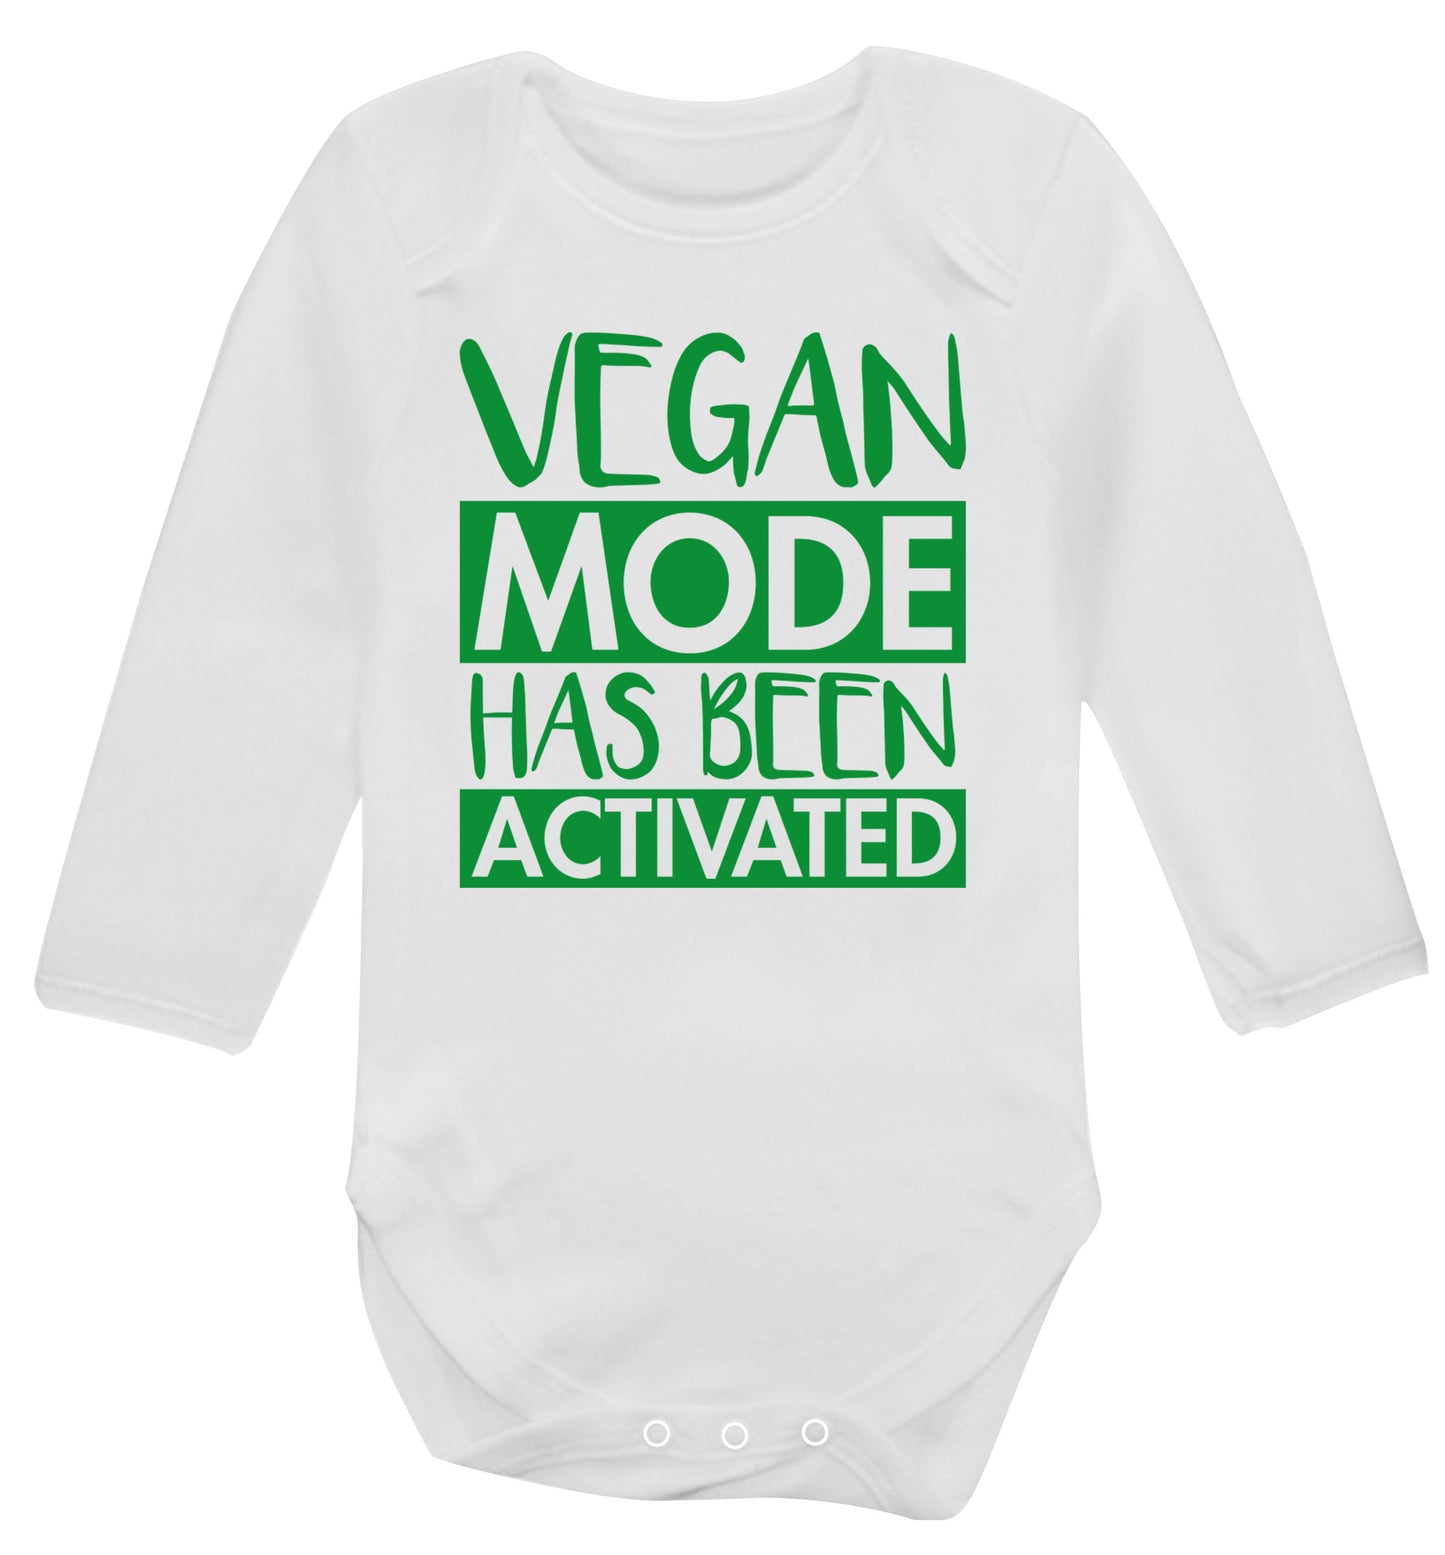 Vegan mode activated Baby Vest long sleeved white 6-12 months